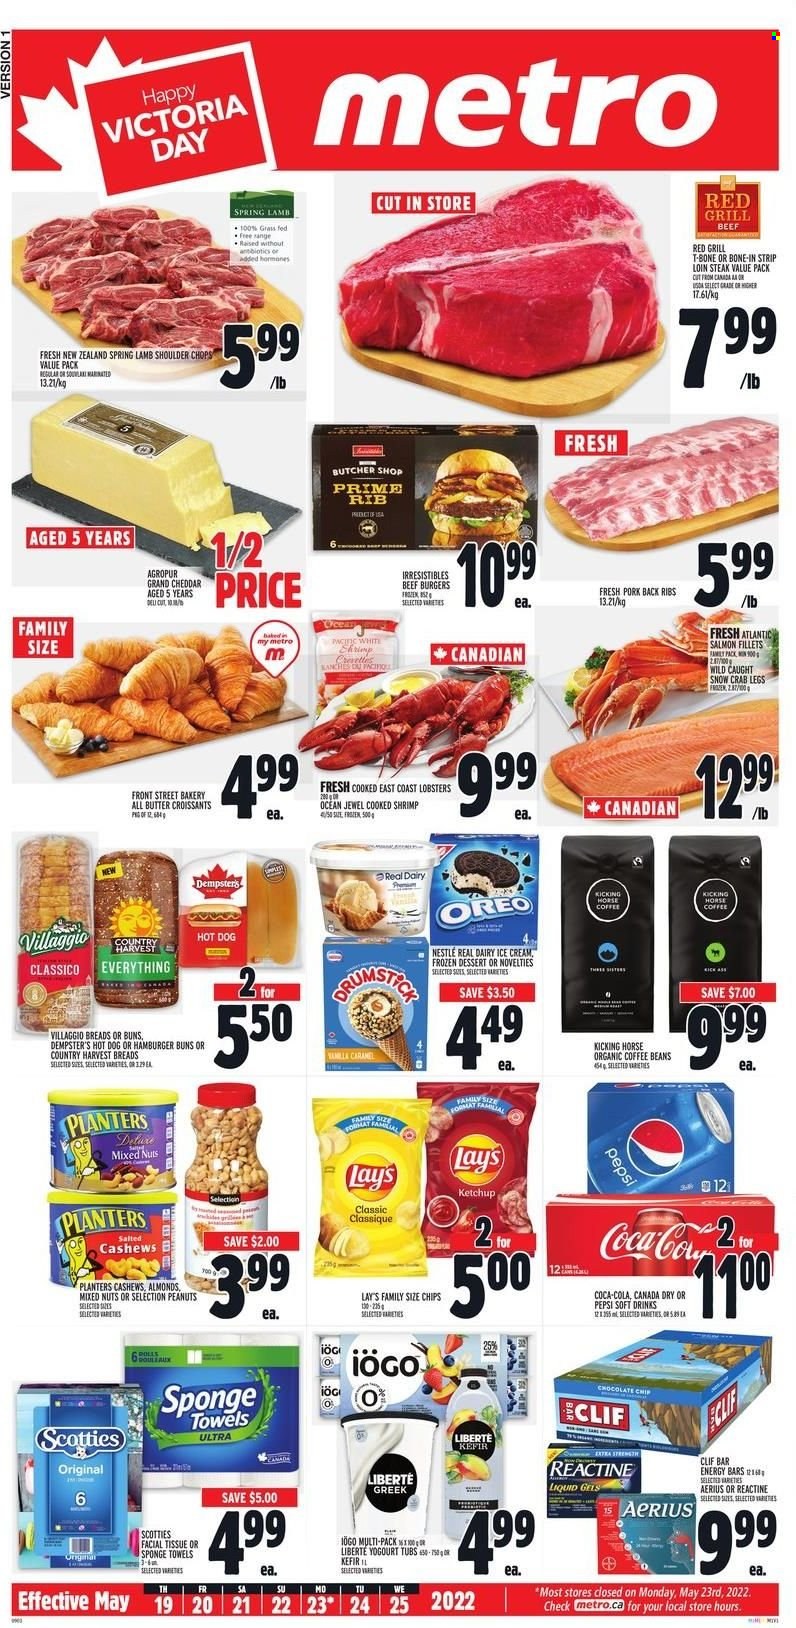 thumbnail - Metro Flyer - May 19, 2022 - May 25, 2022 - Sales products - bread, hot dog rolls, croissant, buns, burger buns, fish fillets, lobster, salmon, salmon fillet, crab legs, crab, shrimps, beef burger, cheese, Oreo, kefir, ice cream, frozen dessert, Country Harvest, chocolate chips, Lay’s, energy bar, ketchup, almonds, cashews, peanuts, mixed nuts, Planters, Canada Dry, Coca-Cola, ginger ale, Pepsi, soft drink, carbonated soft drink, coffee beans, organic coffee, beef meat, t-bone steak, steak, pork meat, pork ribs, pork back ribs, lamb meat, lamb shoulder, tissues, kitchen towels, paper towels, facial tissues, grill, allergy control, Nestlé. Page 1.